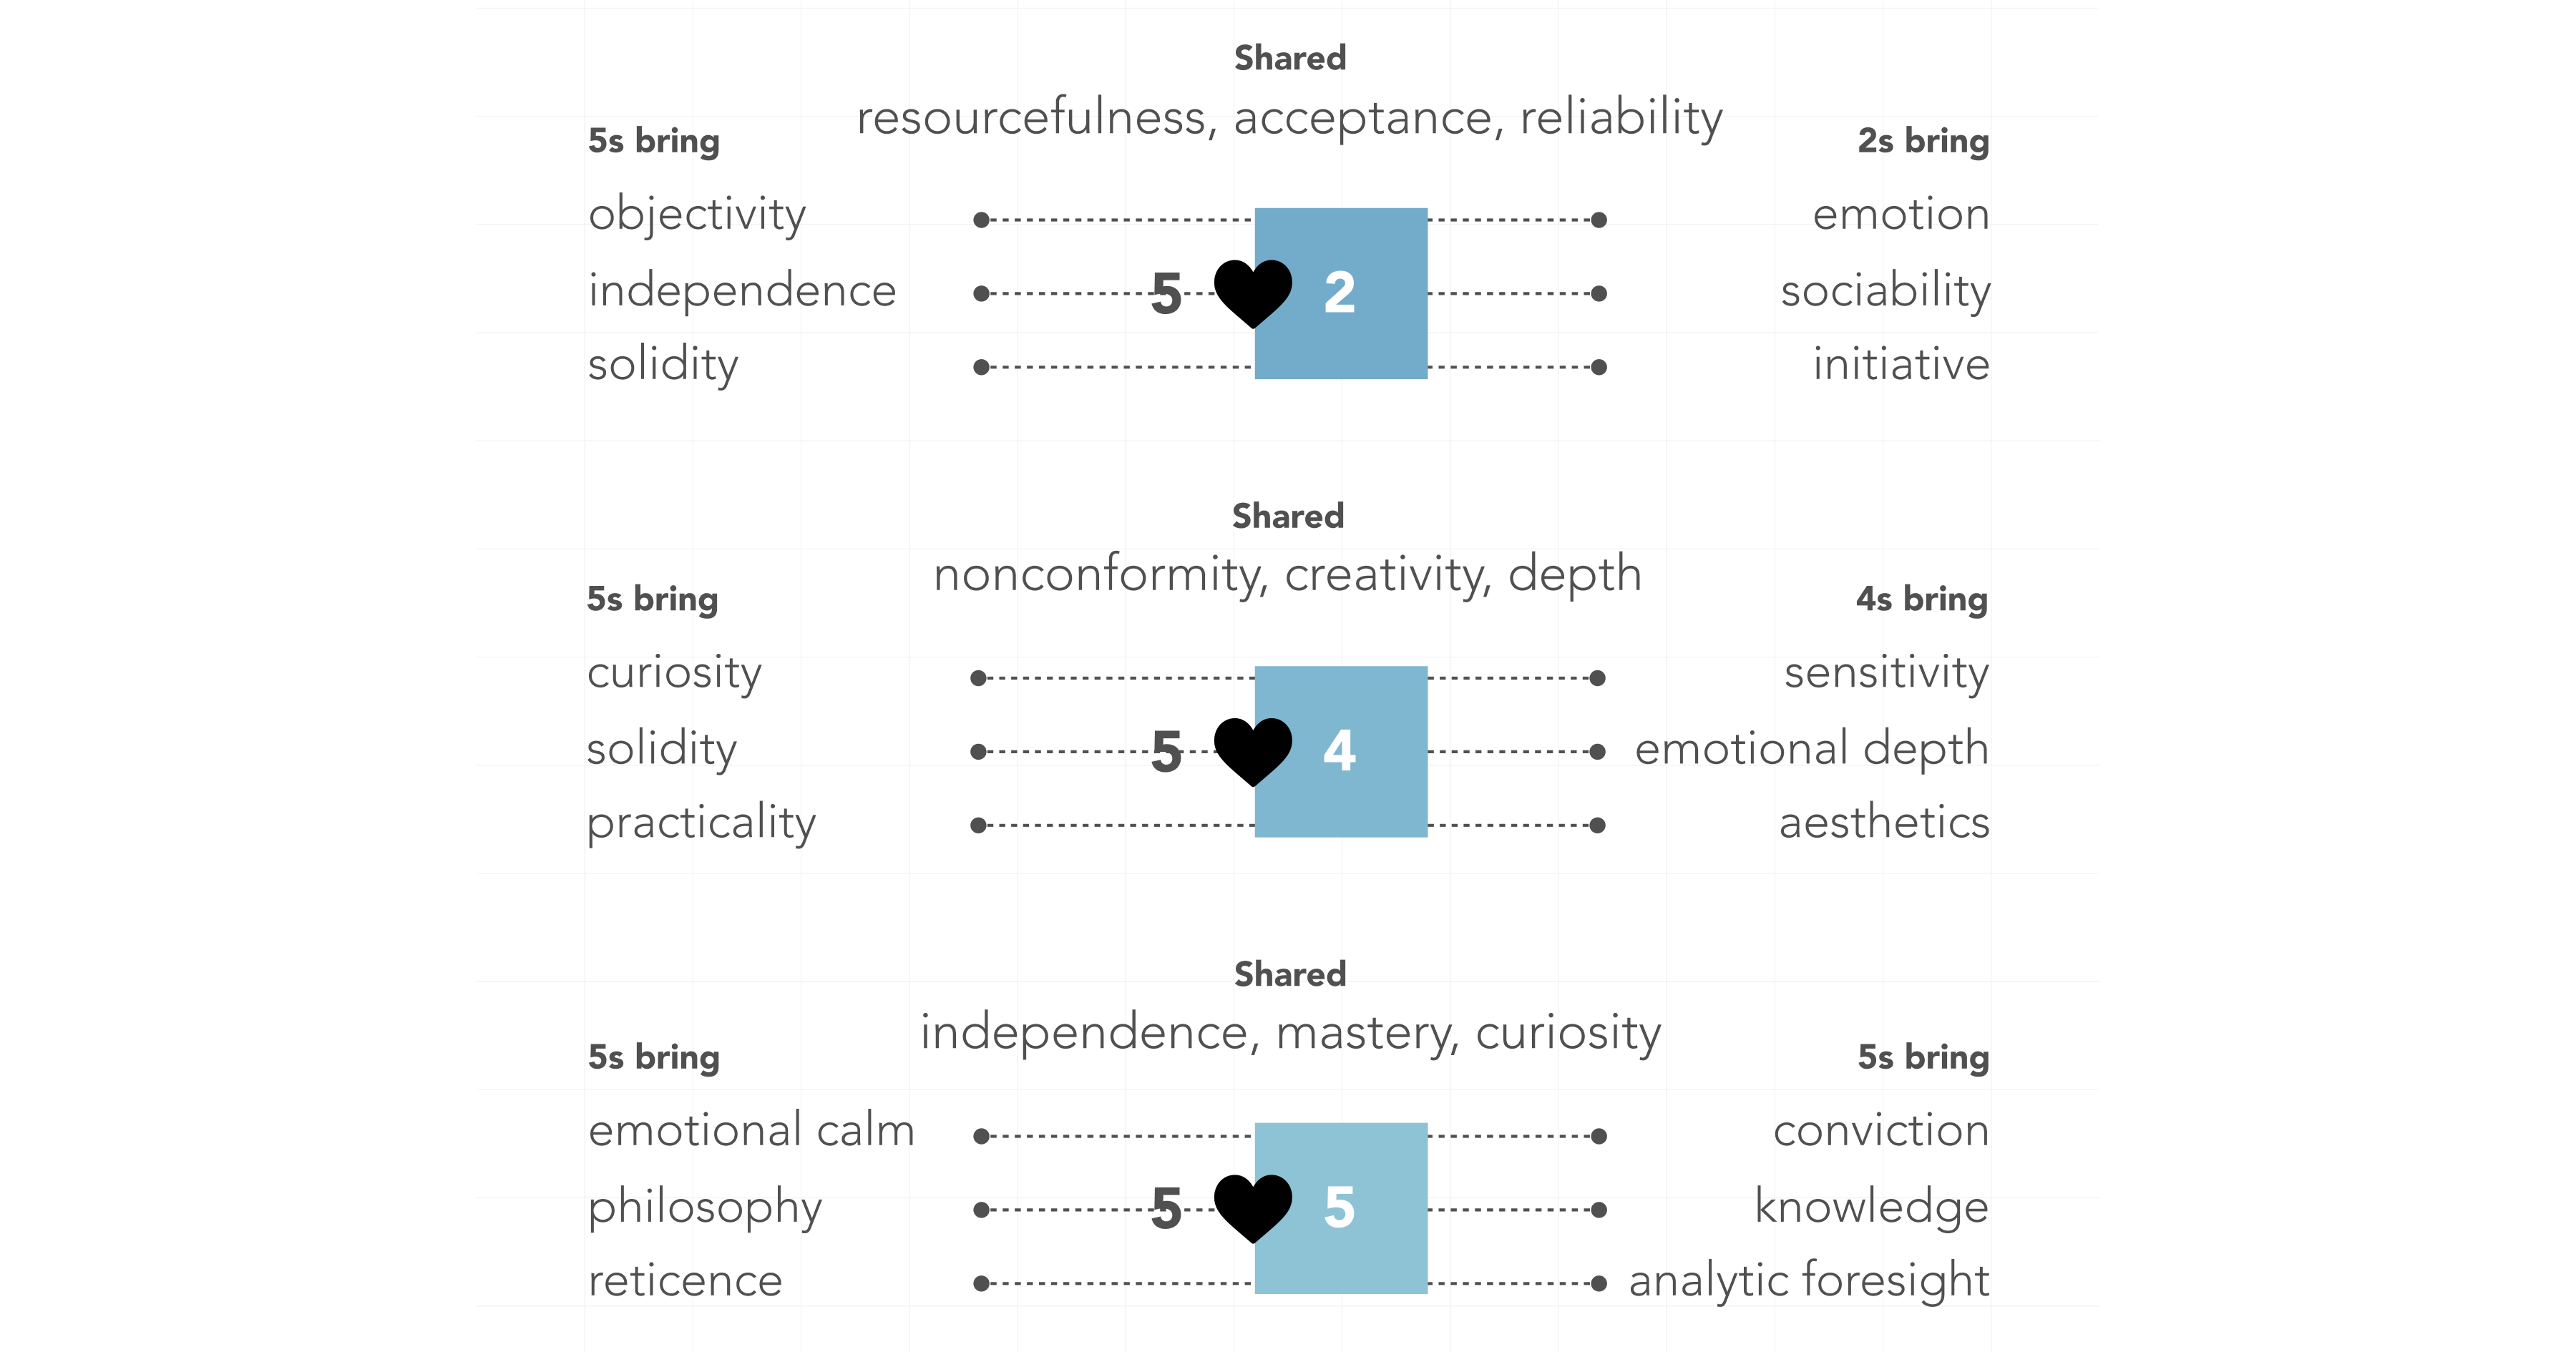 5s and 2s share resourcefulness, acceptance, reliability. 5s bring objectivity, independence, solidity. 2s bring emotion, sociability, initiative. 5s and 4s share nonconformity, creativity, depth. 5s bring curiosity, solidity, practicality. 4s bring sensitivity, emotional depth, aesthetics. 5s and 5s share independence, mastery, curiosity. 5s bring emotional calm, philosophy, reticence. 5s bring conviction, knowledge, analytic foresight.